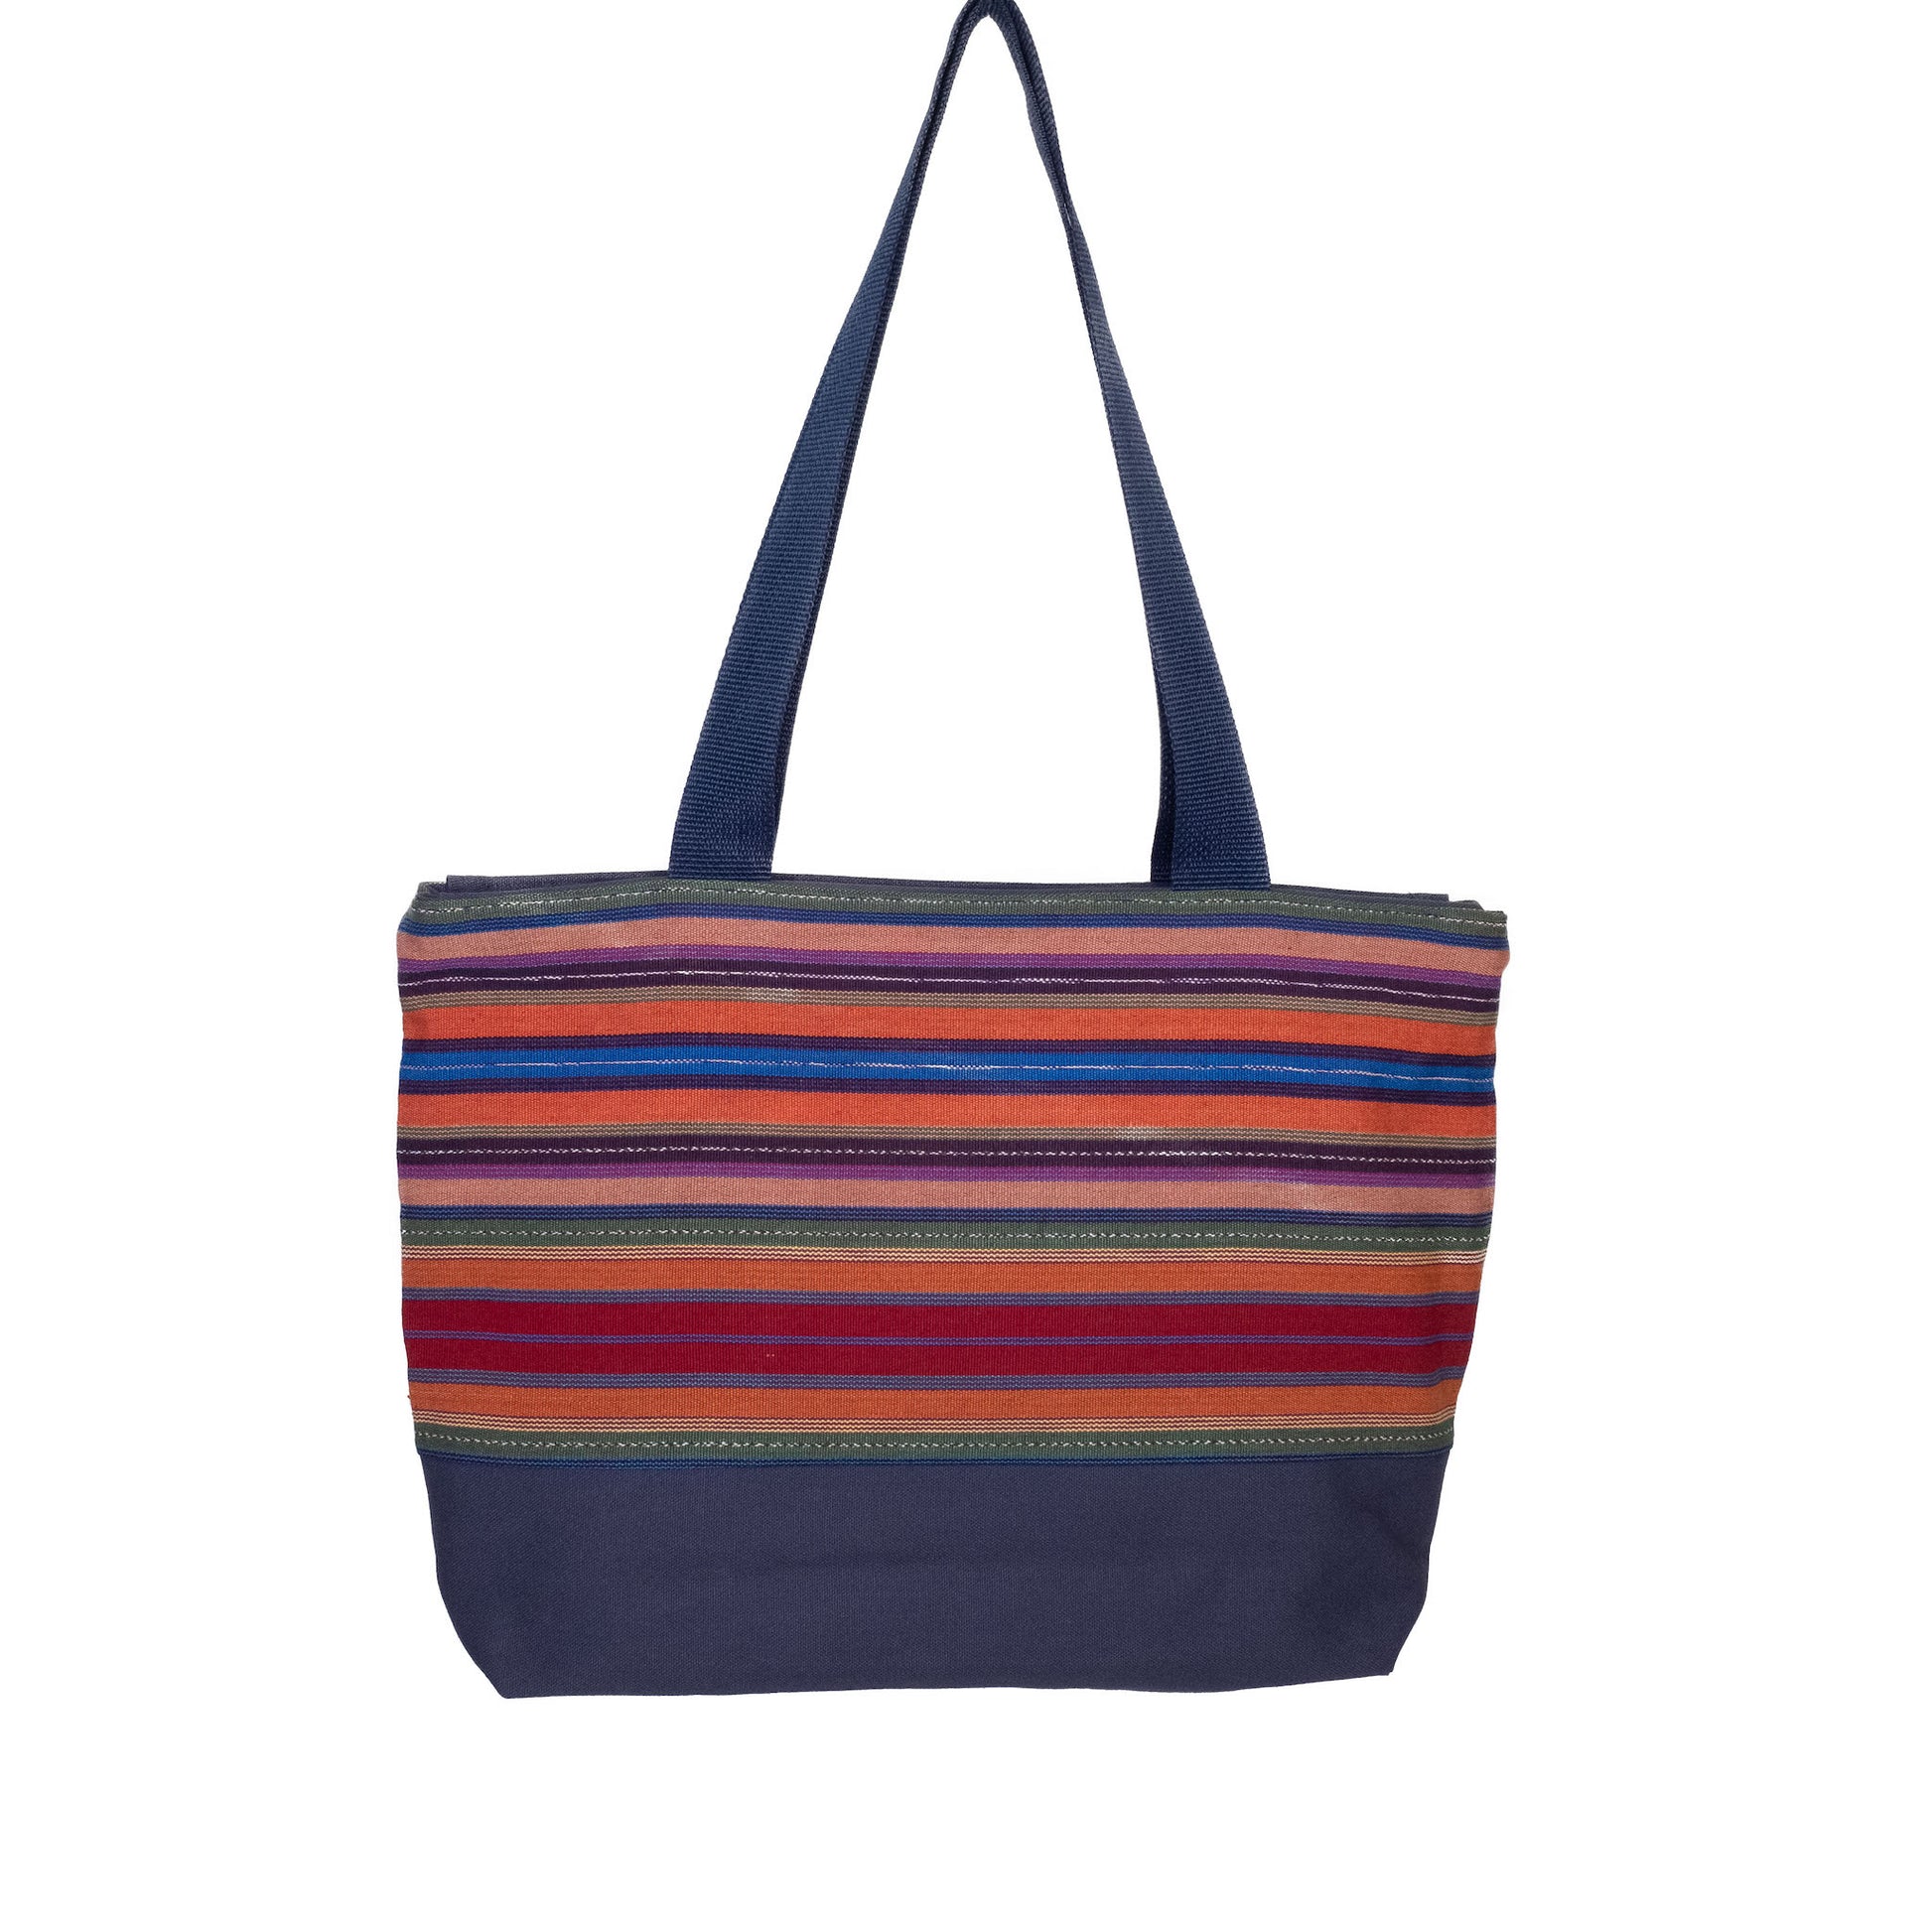 Handmade tote bag in blue featuring multicolored handwoven textiles from Guatemala.